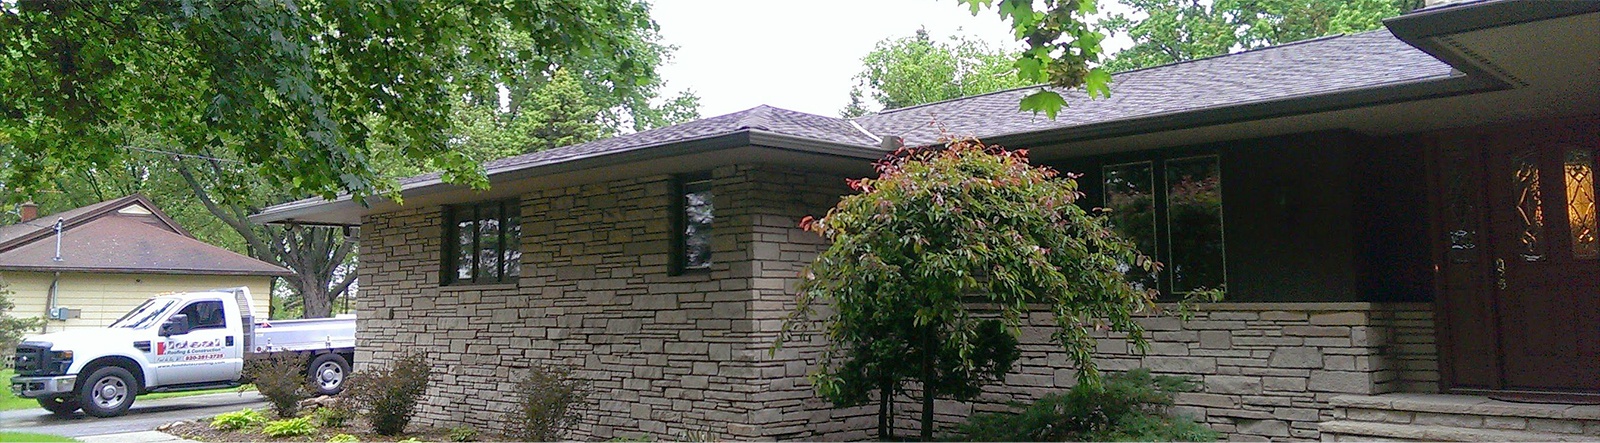 Roofing Company Wisconsin